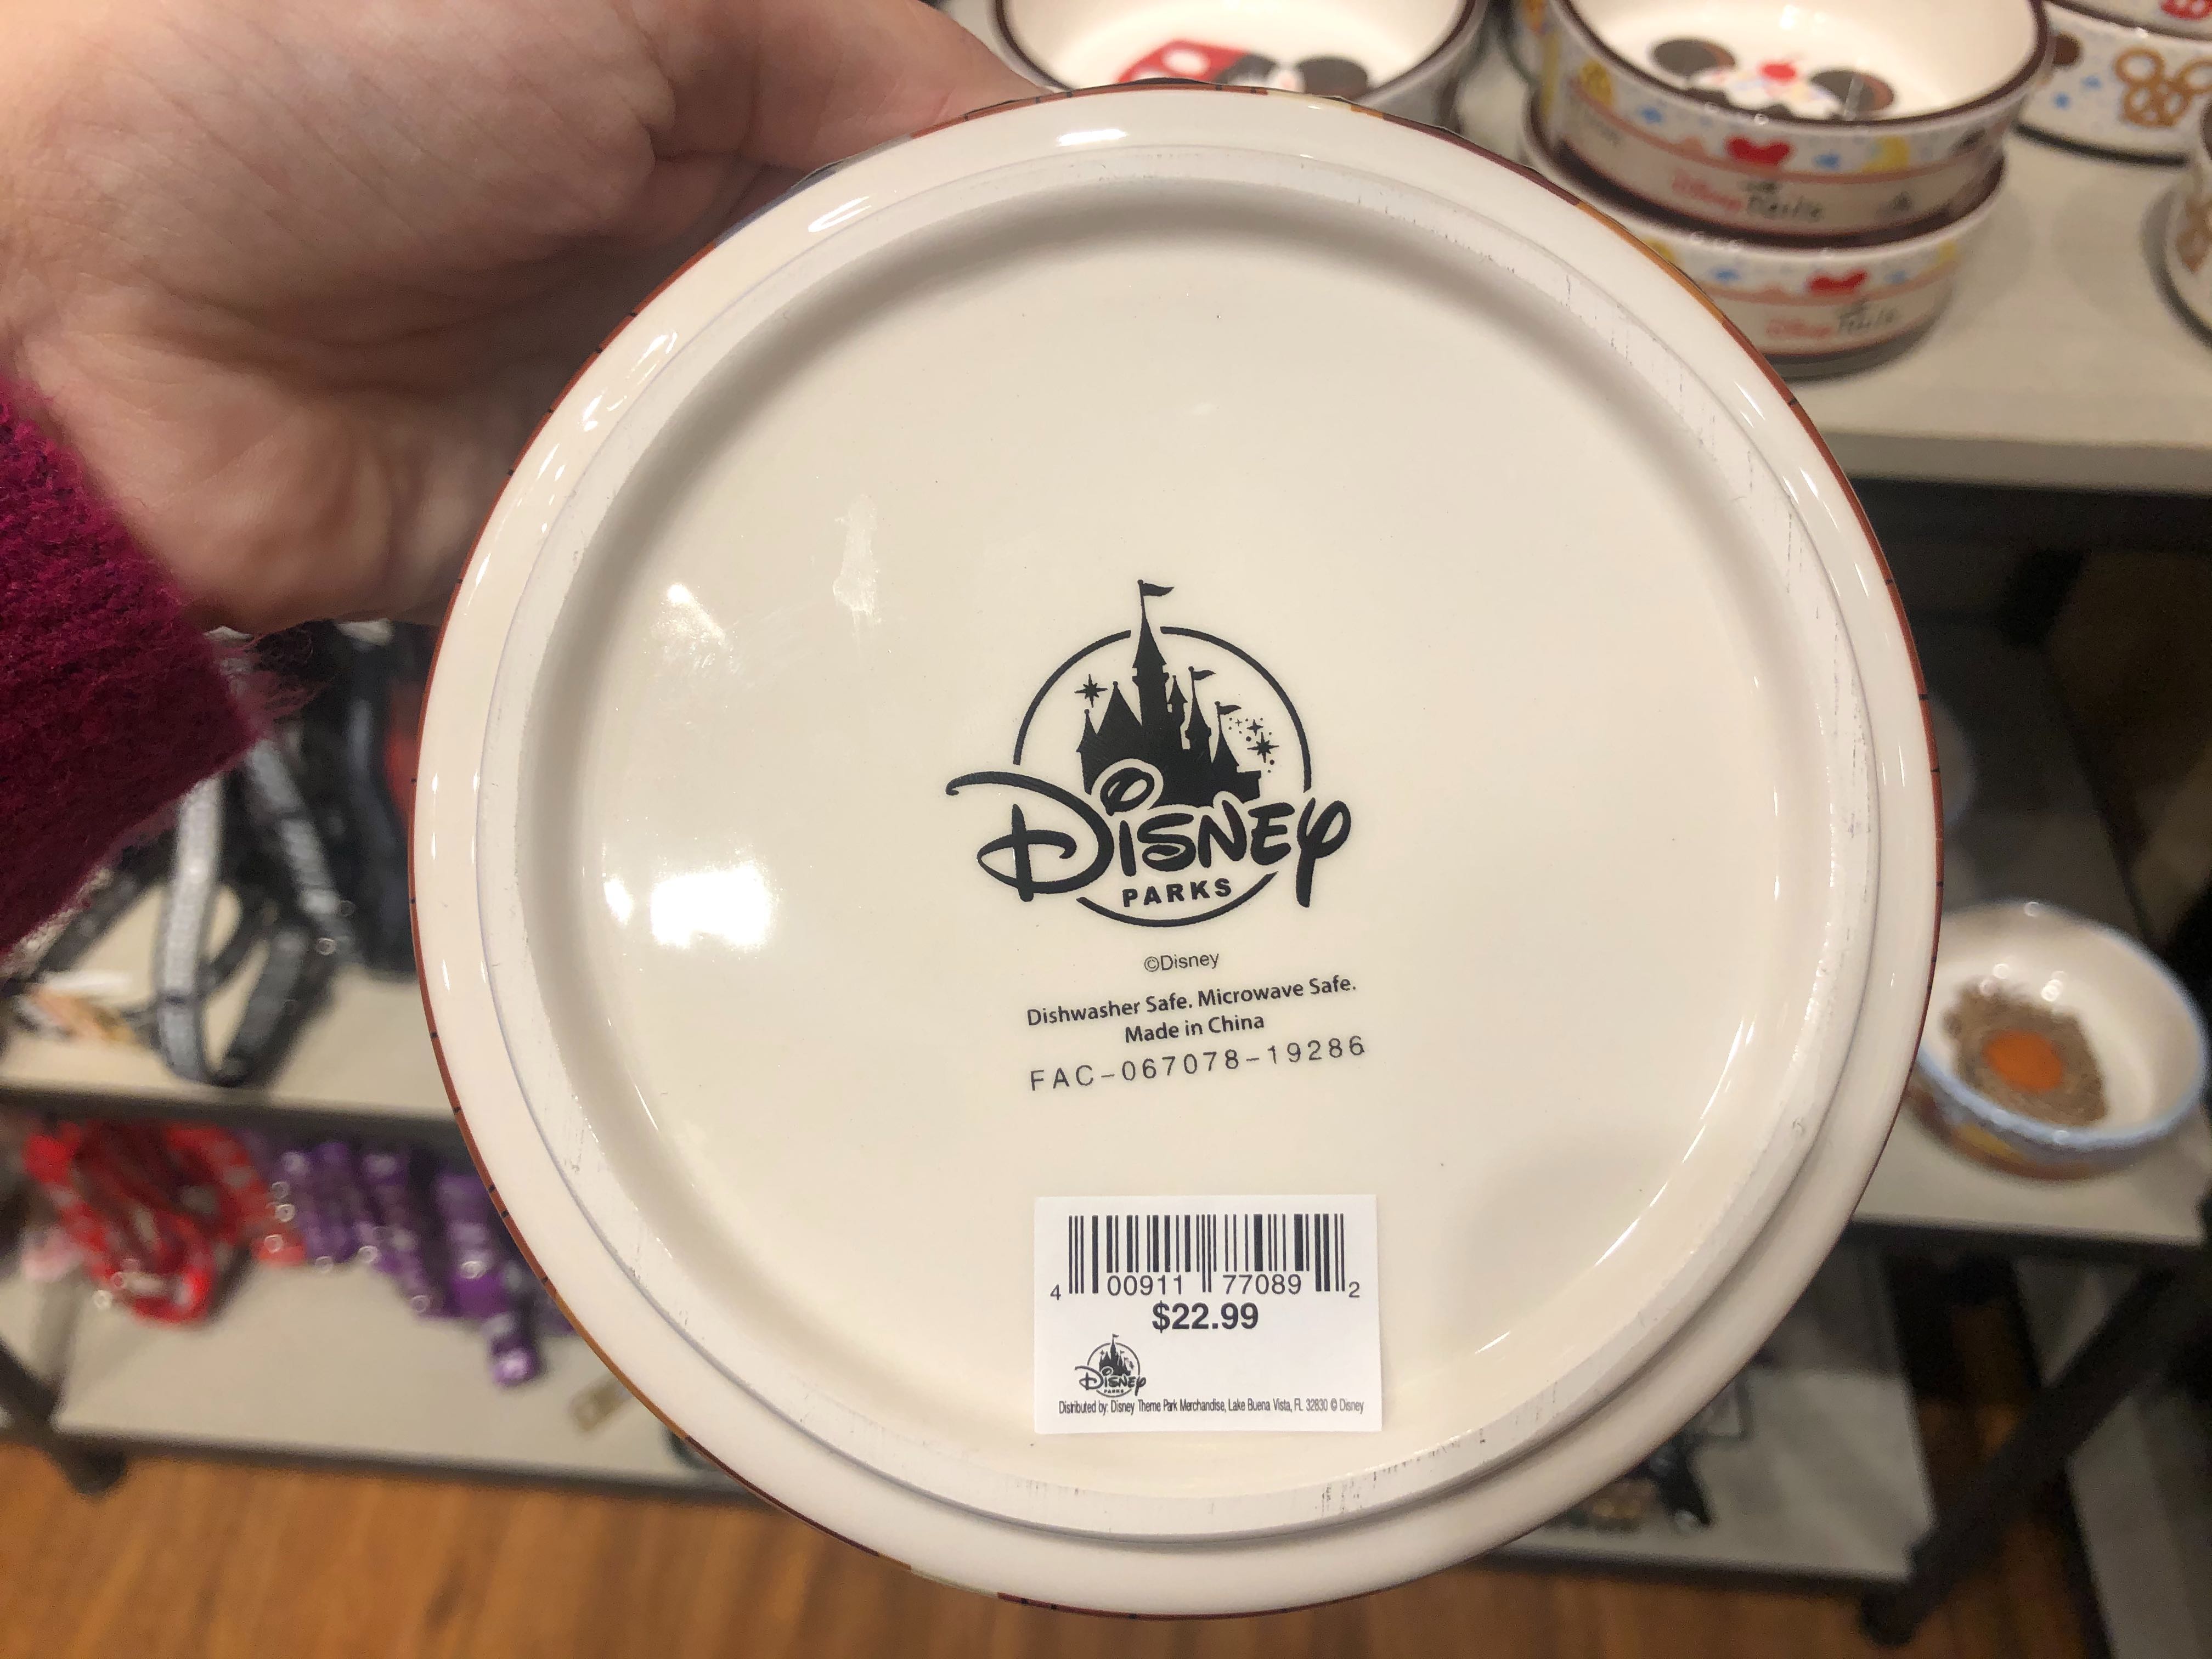 PHOTOS New "Lady and the Tramp" Disney Tails Pet Bowl Now